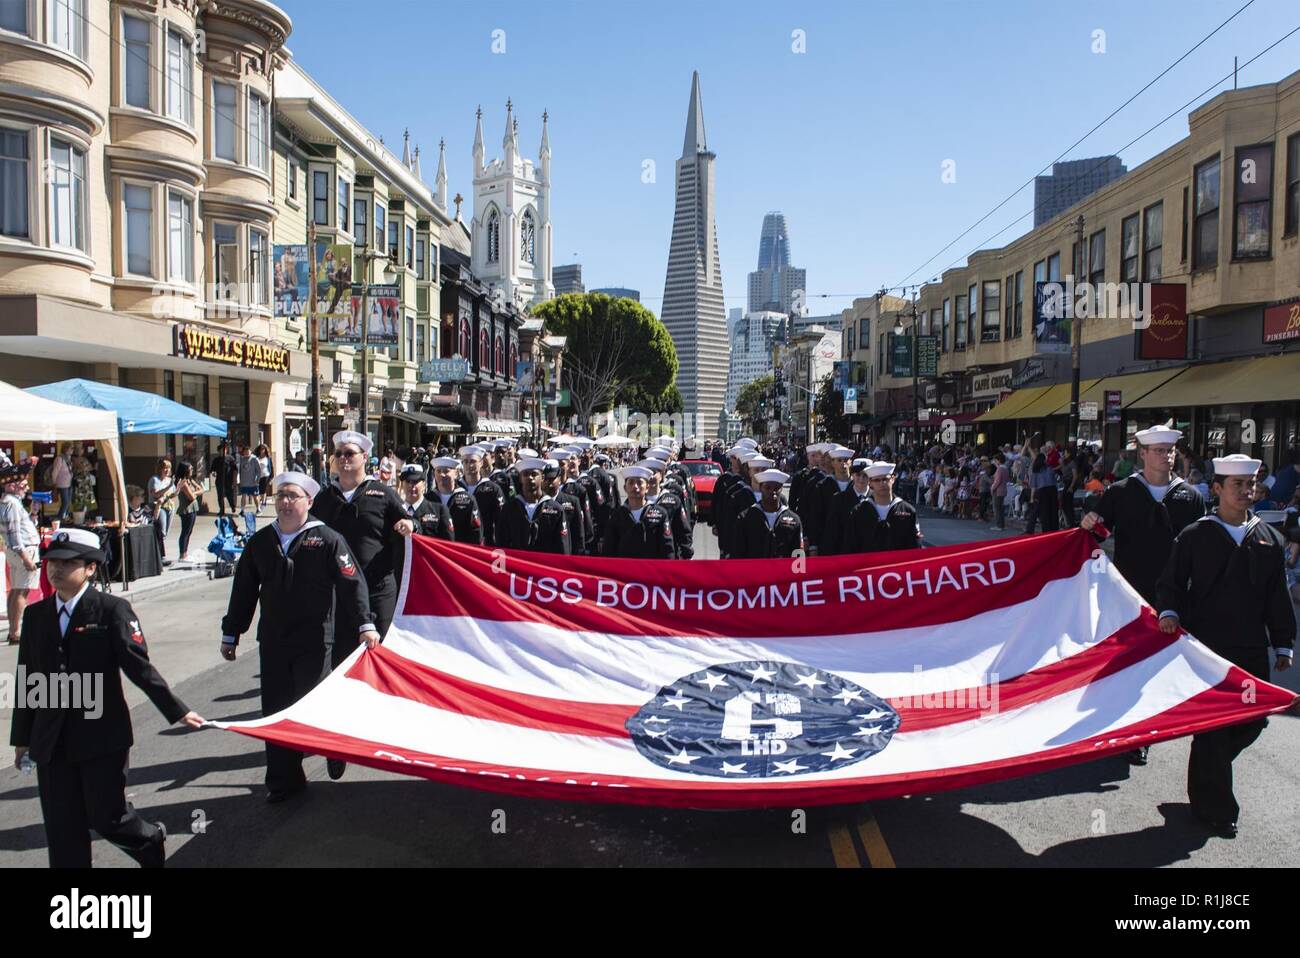 SAN FRANCISCO (Oct. 7, 2018) Sailors, assigned to the amphibious assault ship USS Bonhomme Richard (LHD 6), march in formation during the Italian Heritage Parade in support of San Francisco Fleet Week 2018. San Francisco Fleet Week is an opportunity for the American public to meet their Navy, Marine Corps and Coast Guard teams and experience America’s sea services. During fleet week, service members participate in various community service events, showcase capabilities and equipment to the community, and enjoy the hospitality of San Francisco and its surrounding areas. Stock Photo